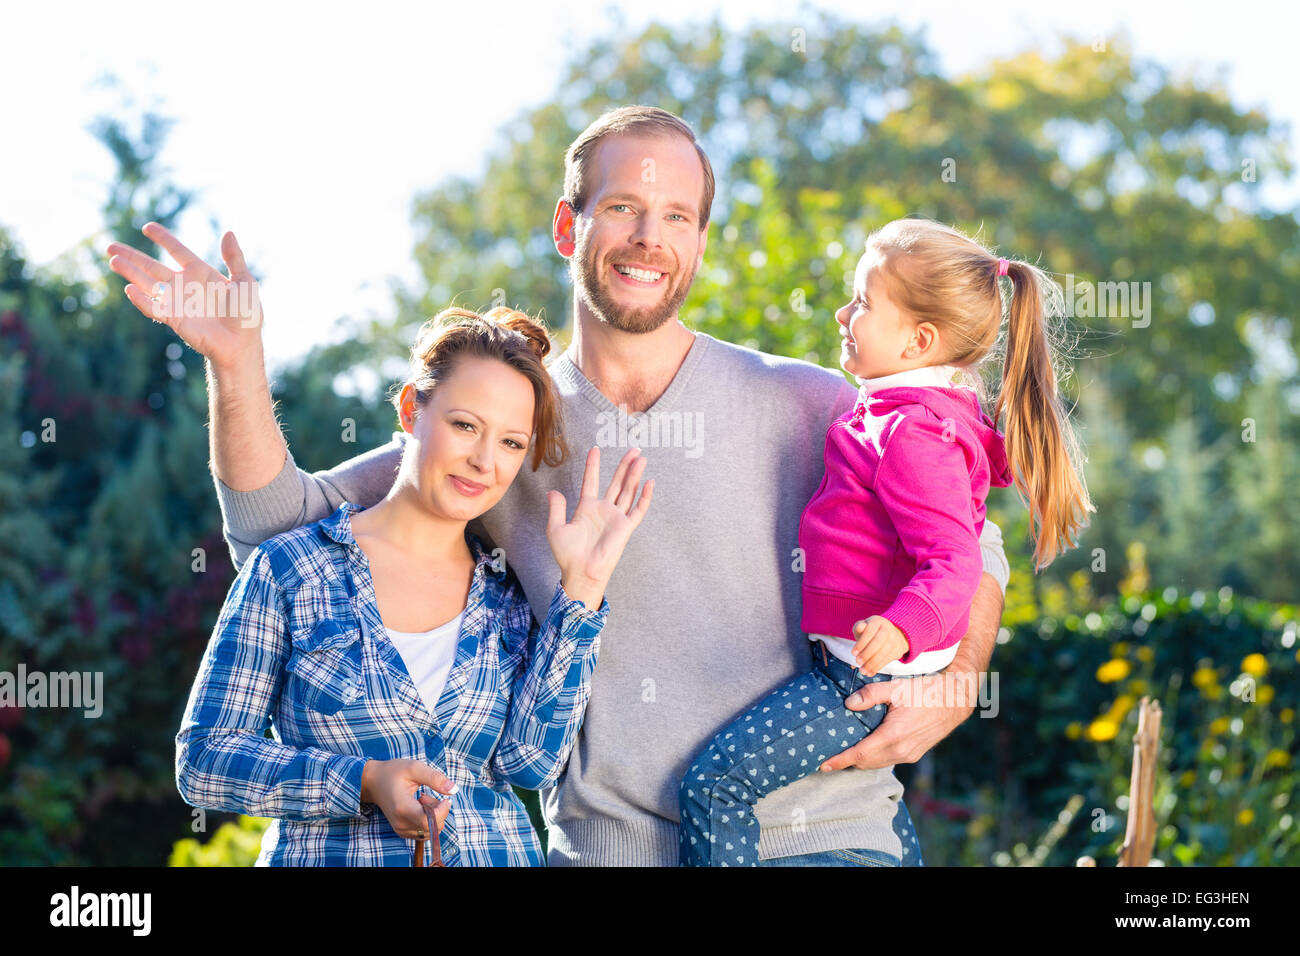 Mother, father and daughter in garden Stock Photo